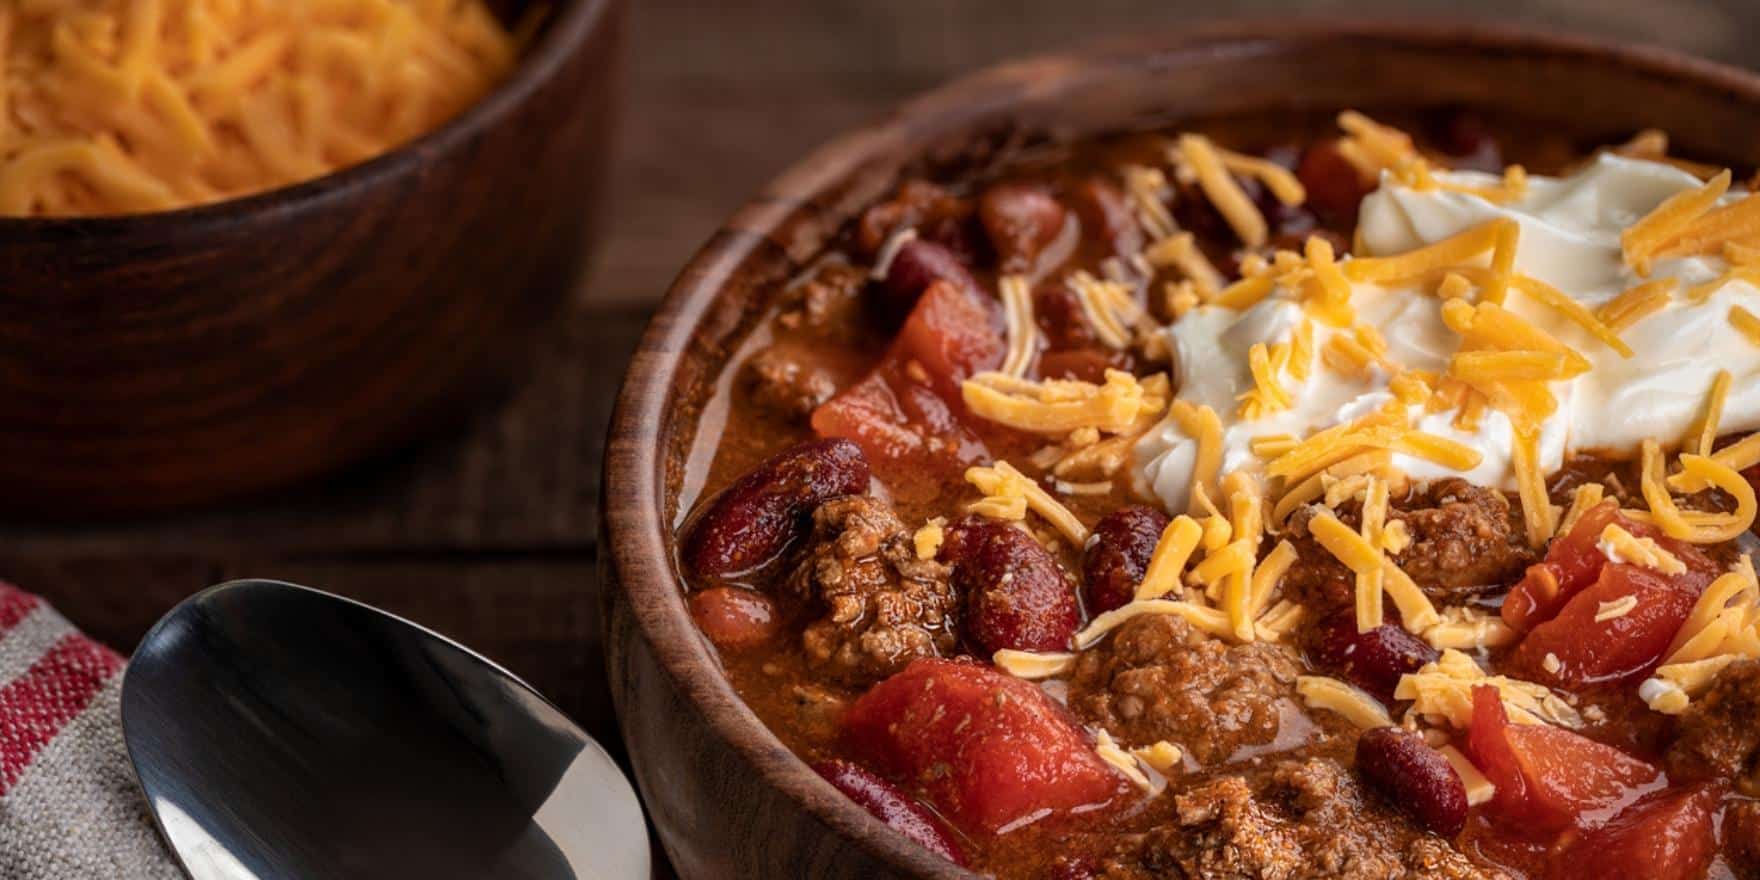 an image of chili in a bowl with sour cream and cheddar cheese on top